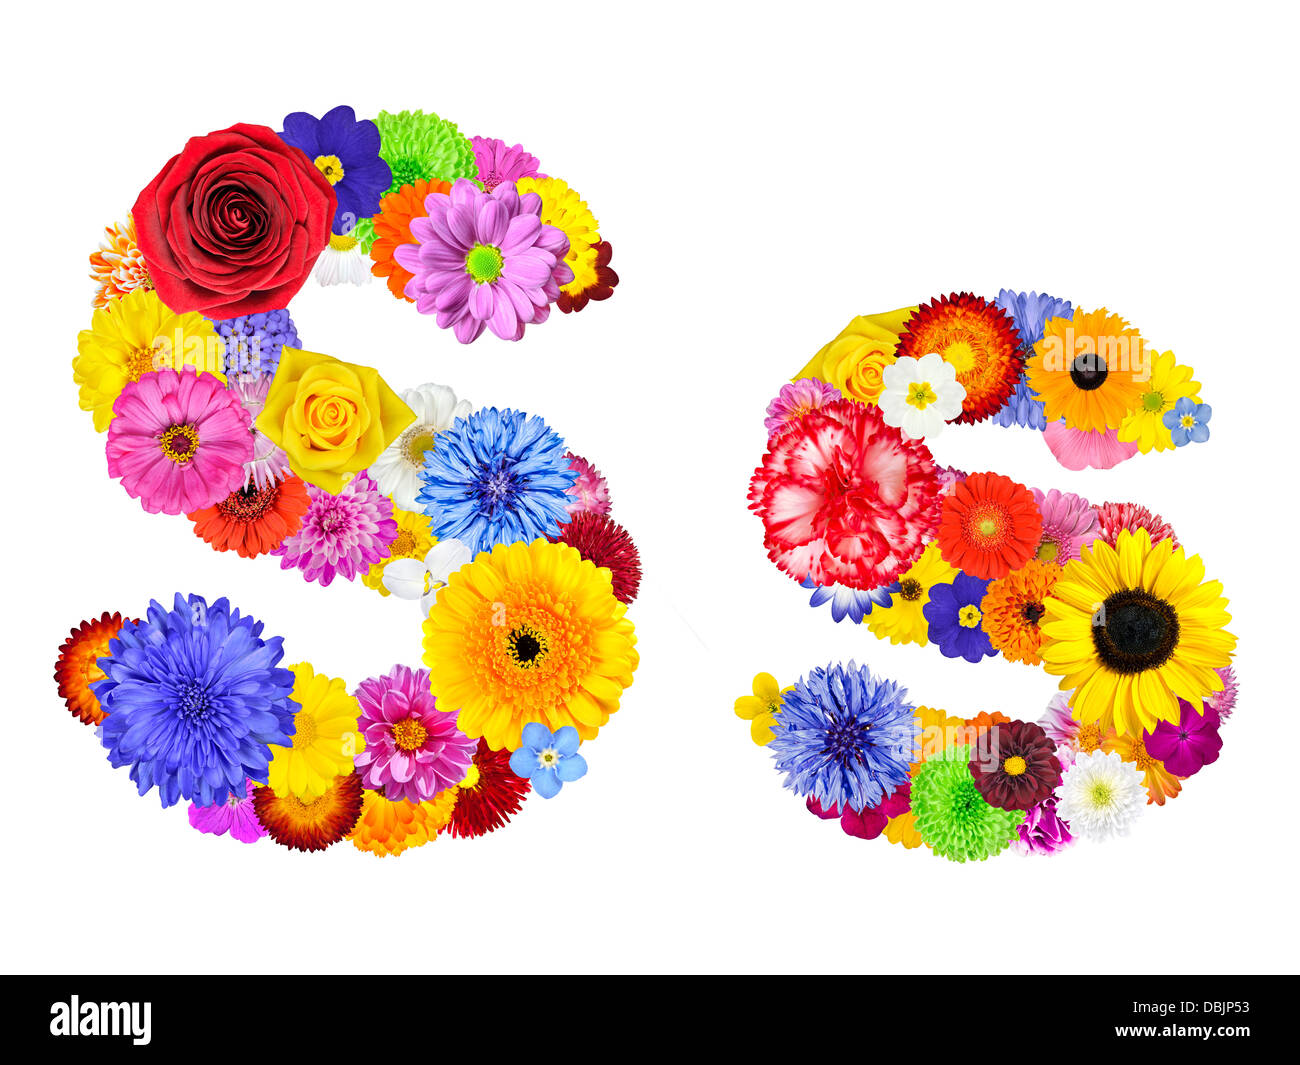 Letter S of Flower Alphabet Isolated on White. Letter consist of many colorful and original flowers Stock Photo